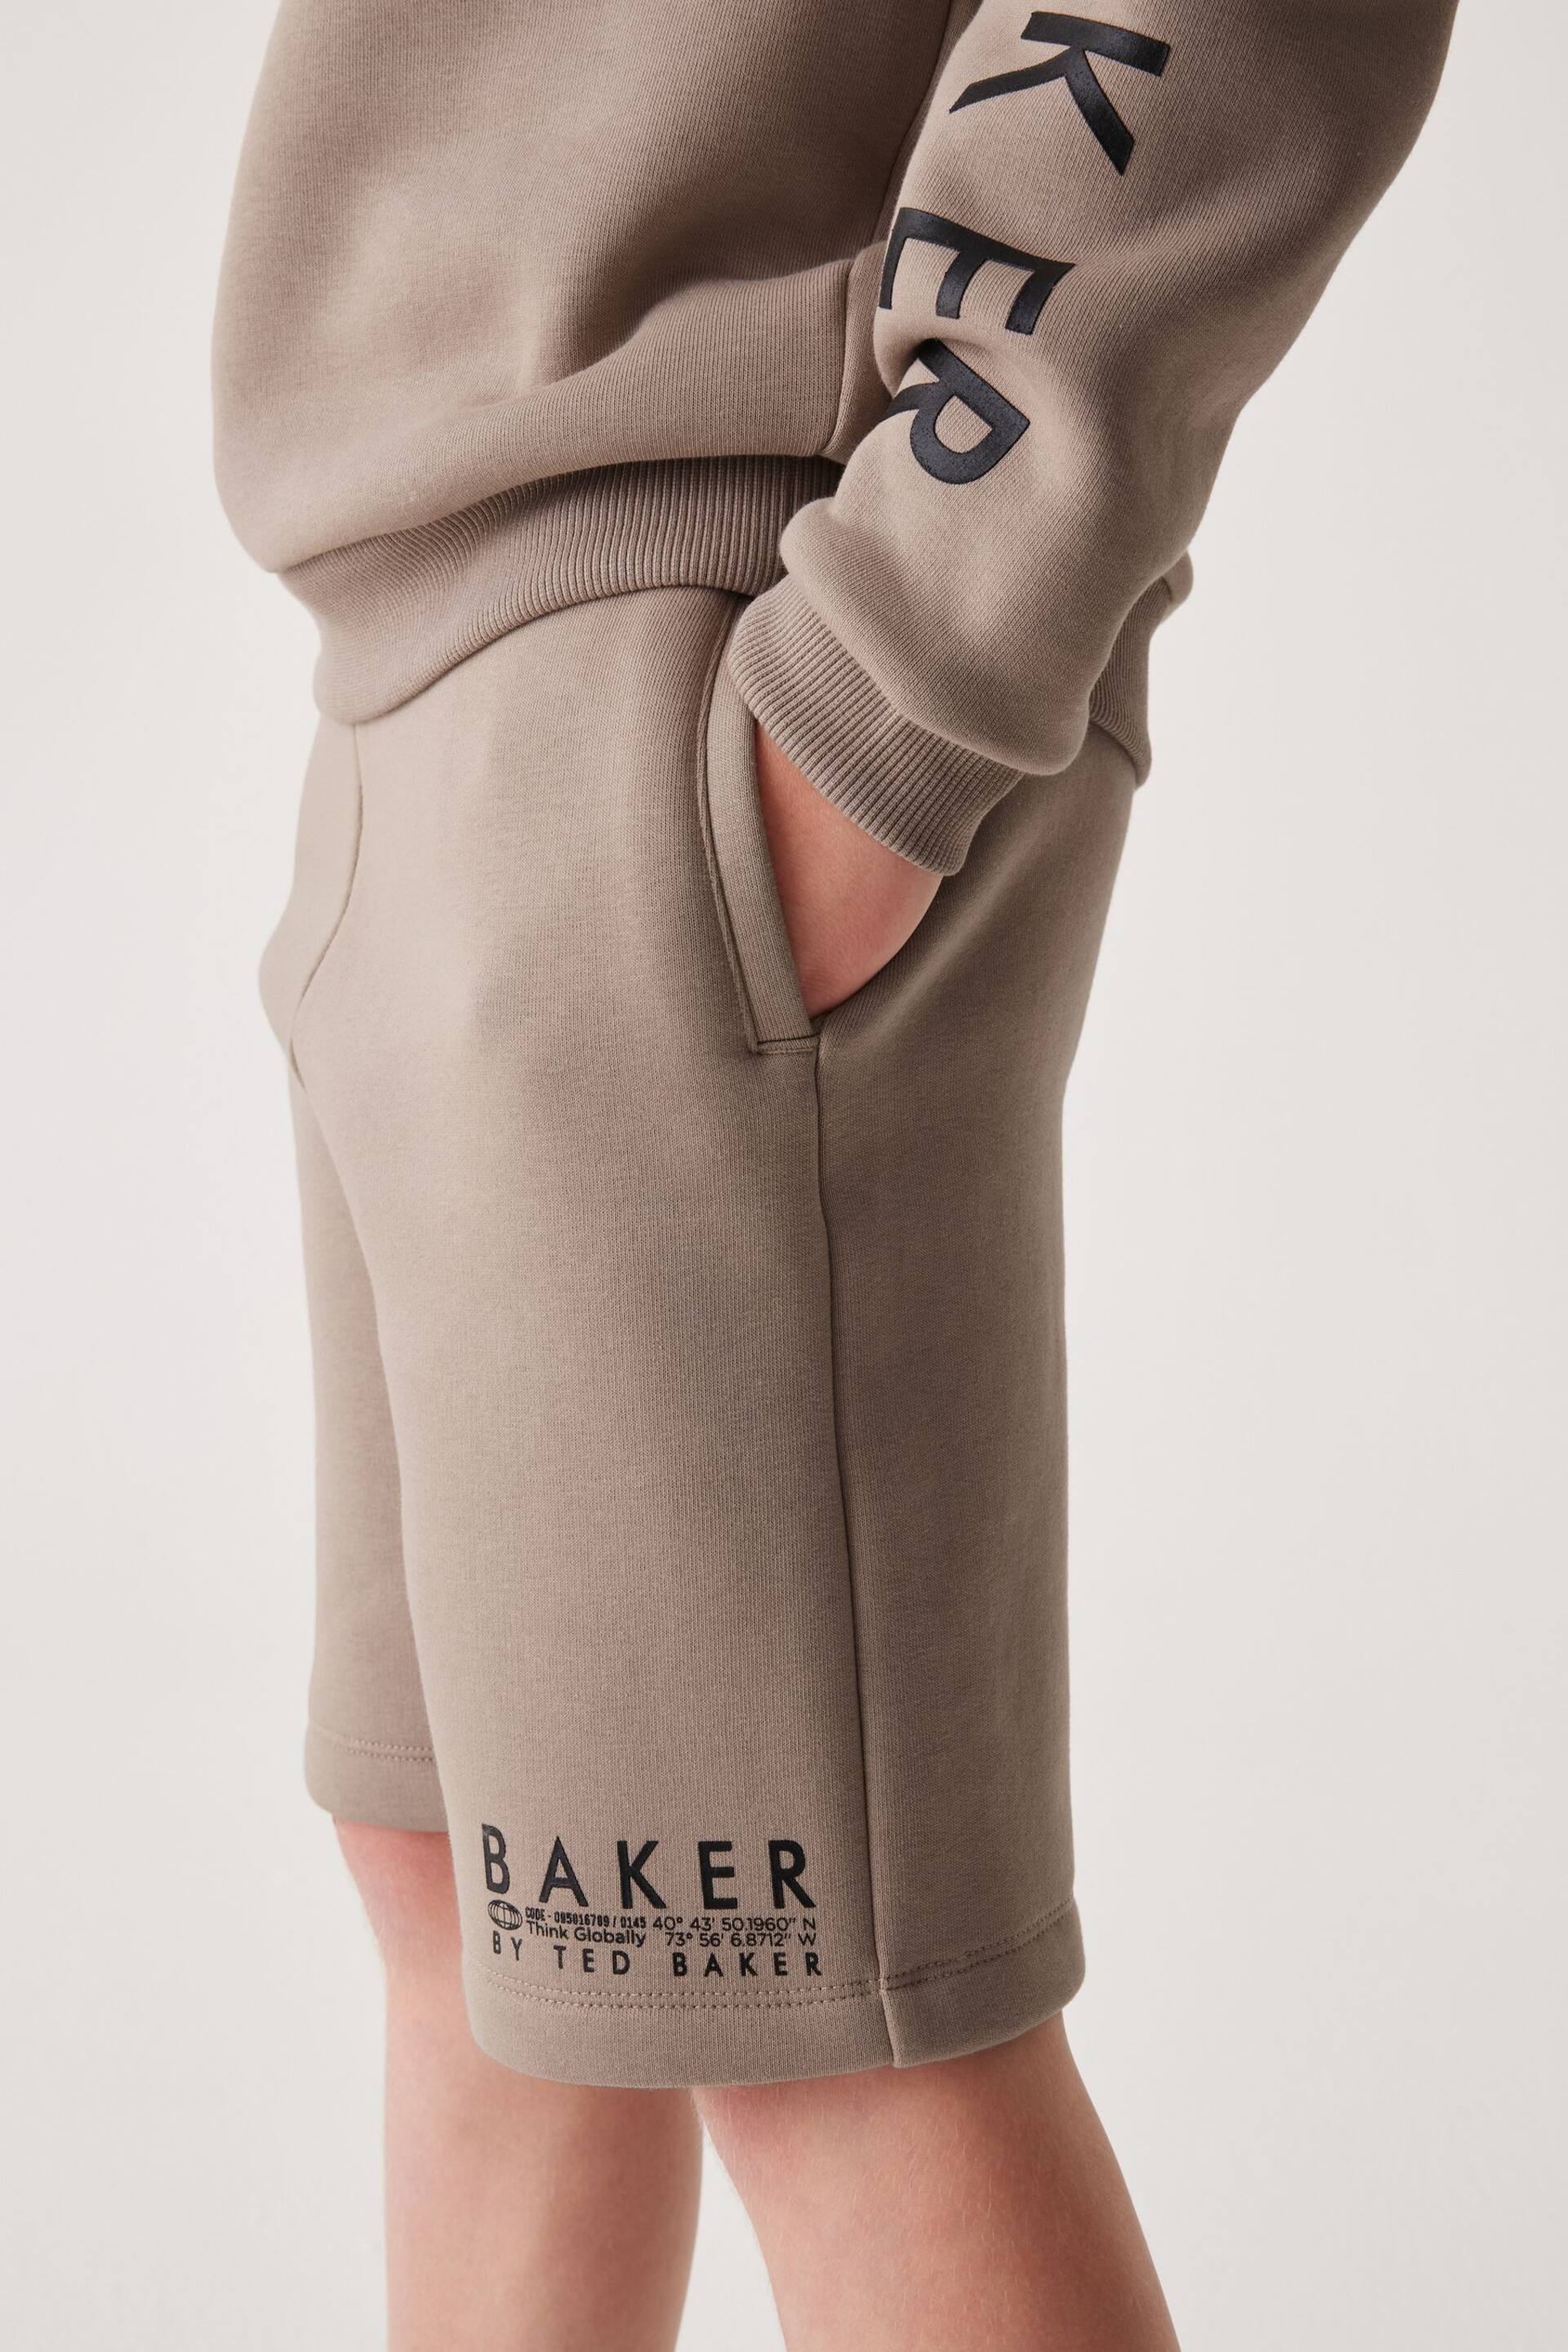 Baker by Ted Baker Seam Sweatshirt and Short Set - Image 12 of 16